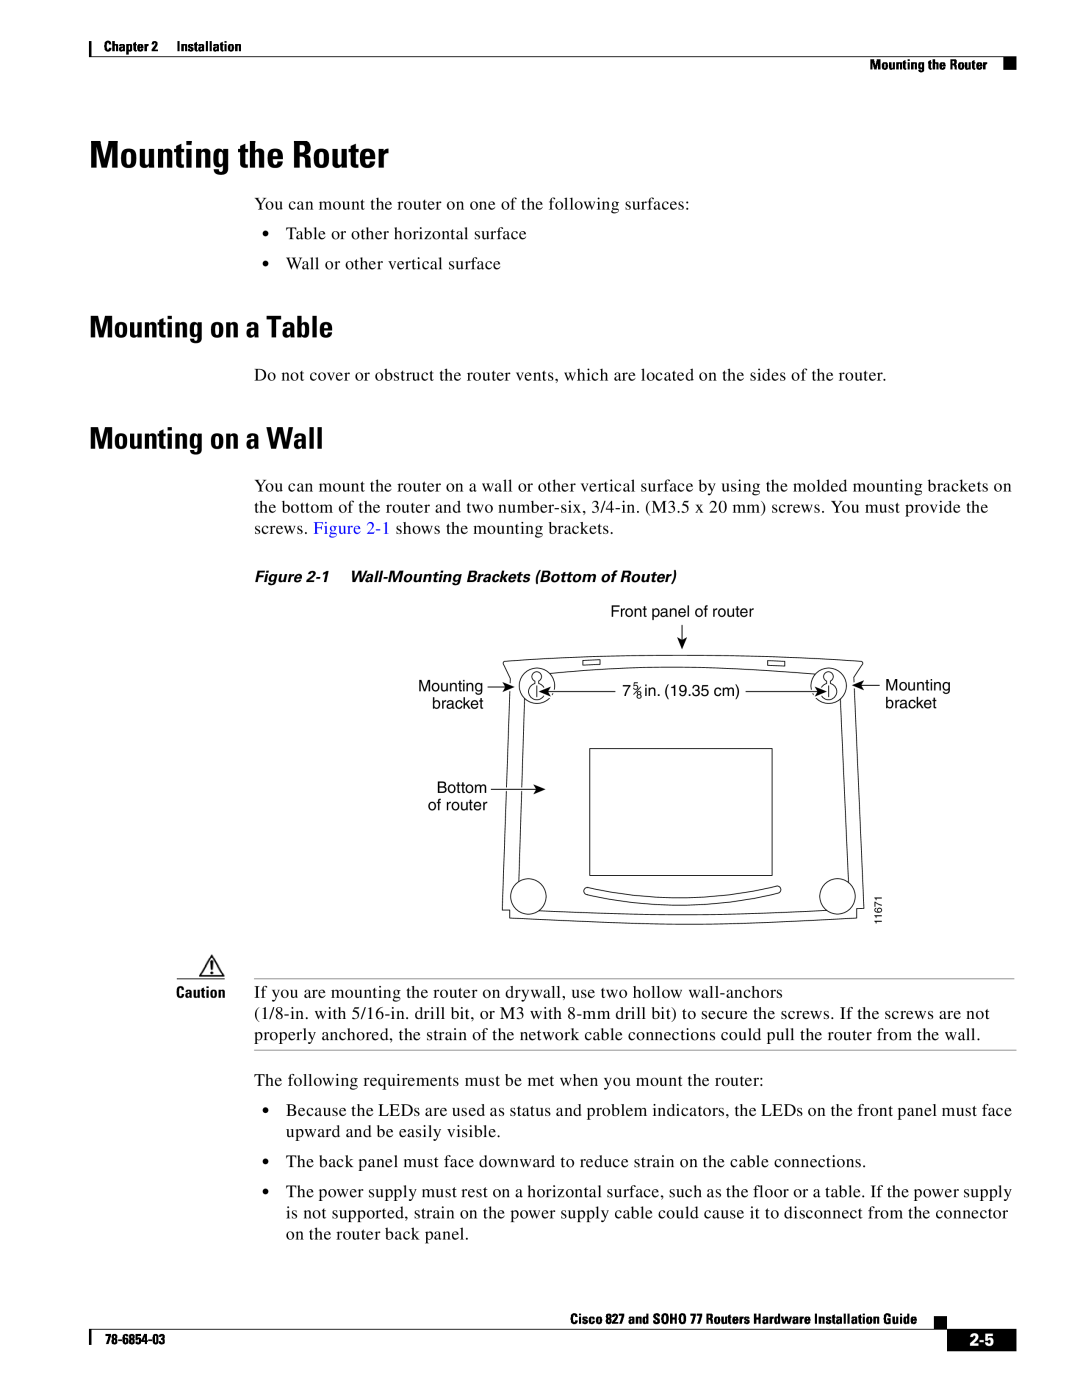 Cisco Systems SOHO 77 manual Mounting the Router, Mounting on a Table, Mounting on a Wall 